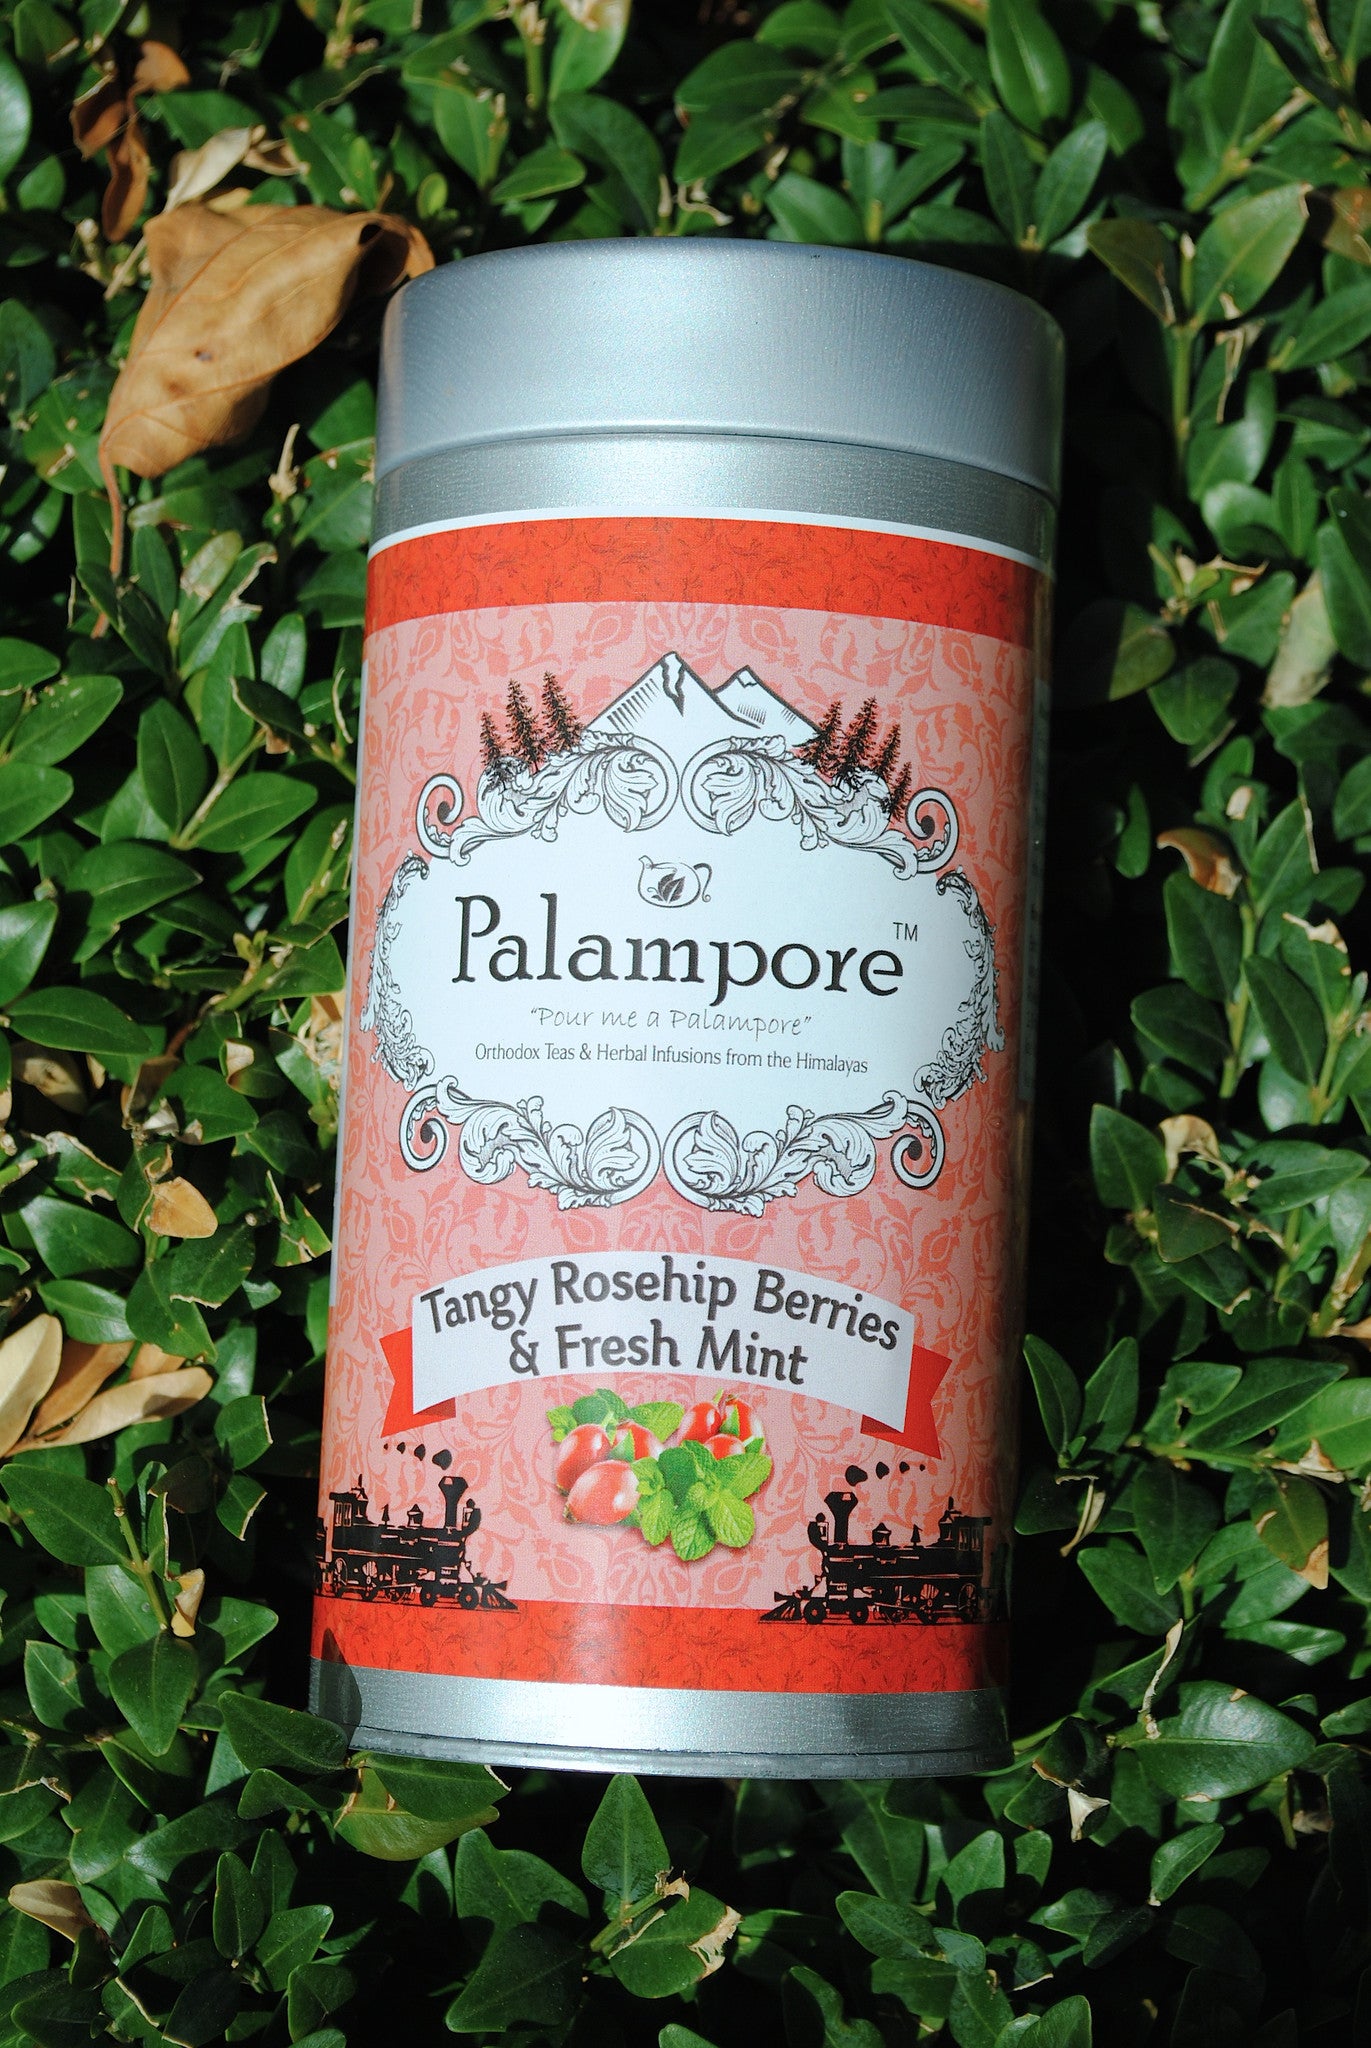 PALAMPORE- Tangy Rosehip Berries & Fresh Mint Infusion